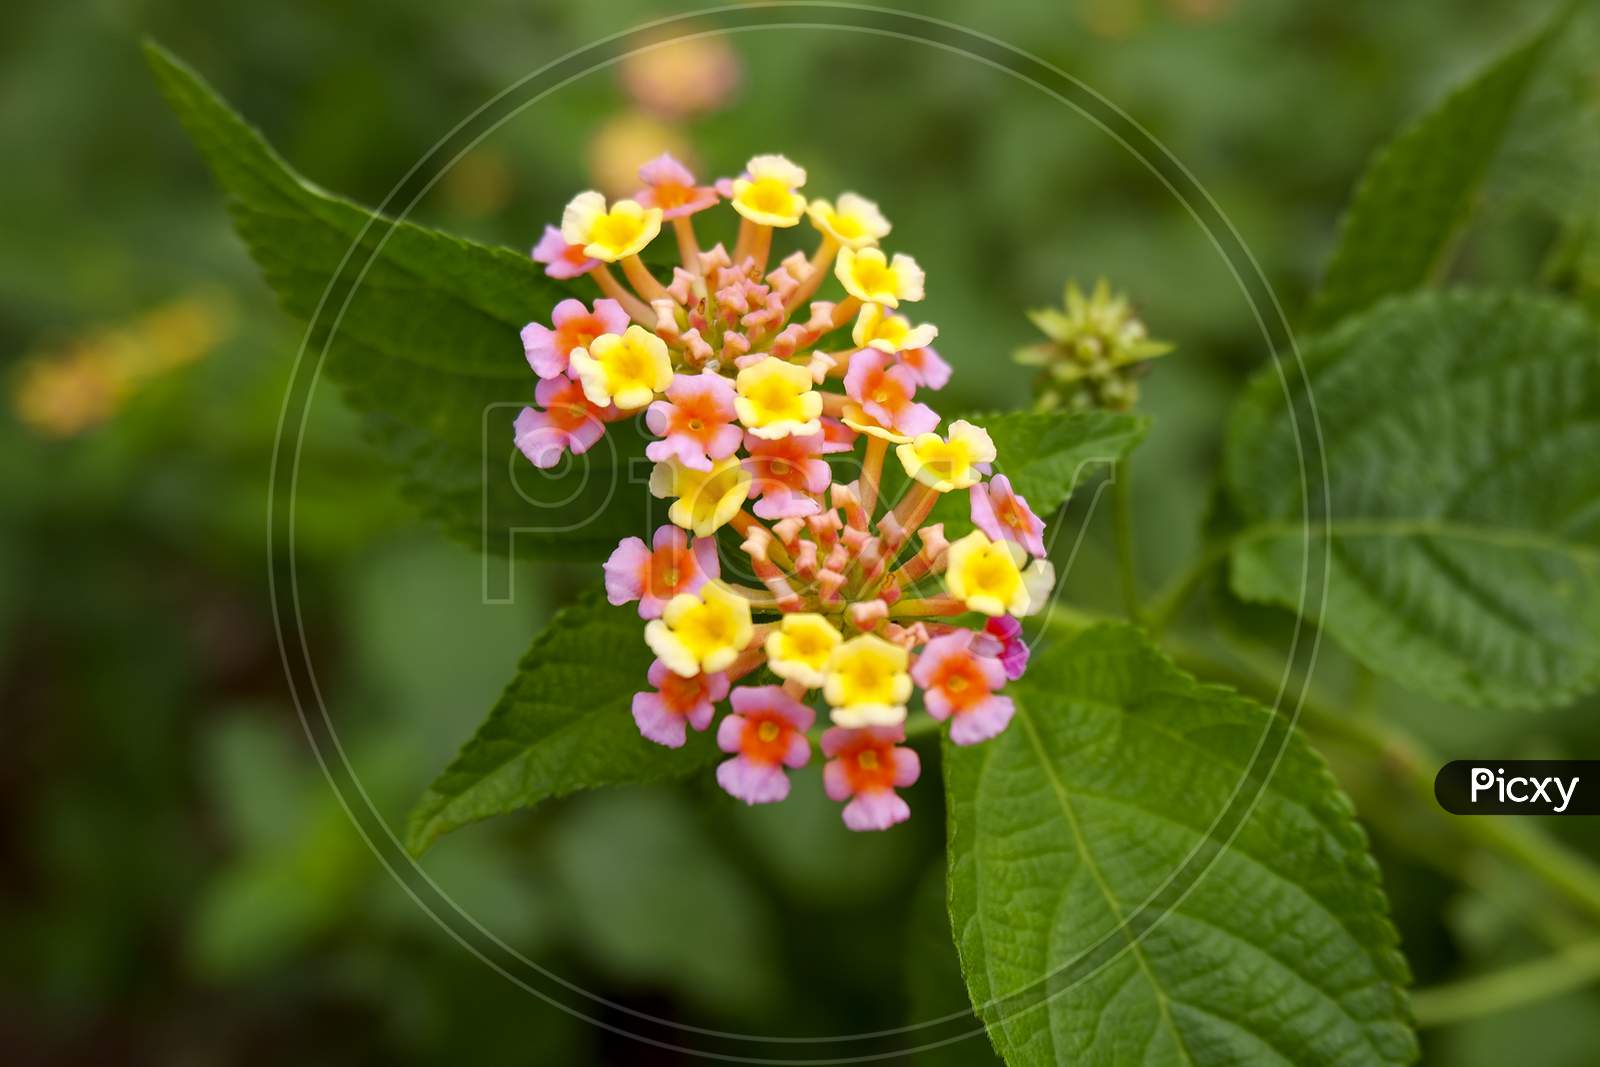 A View Of Pink & Yellow Tiny Flowers On Plant In Garden